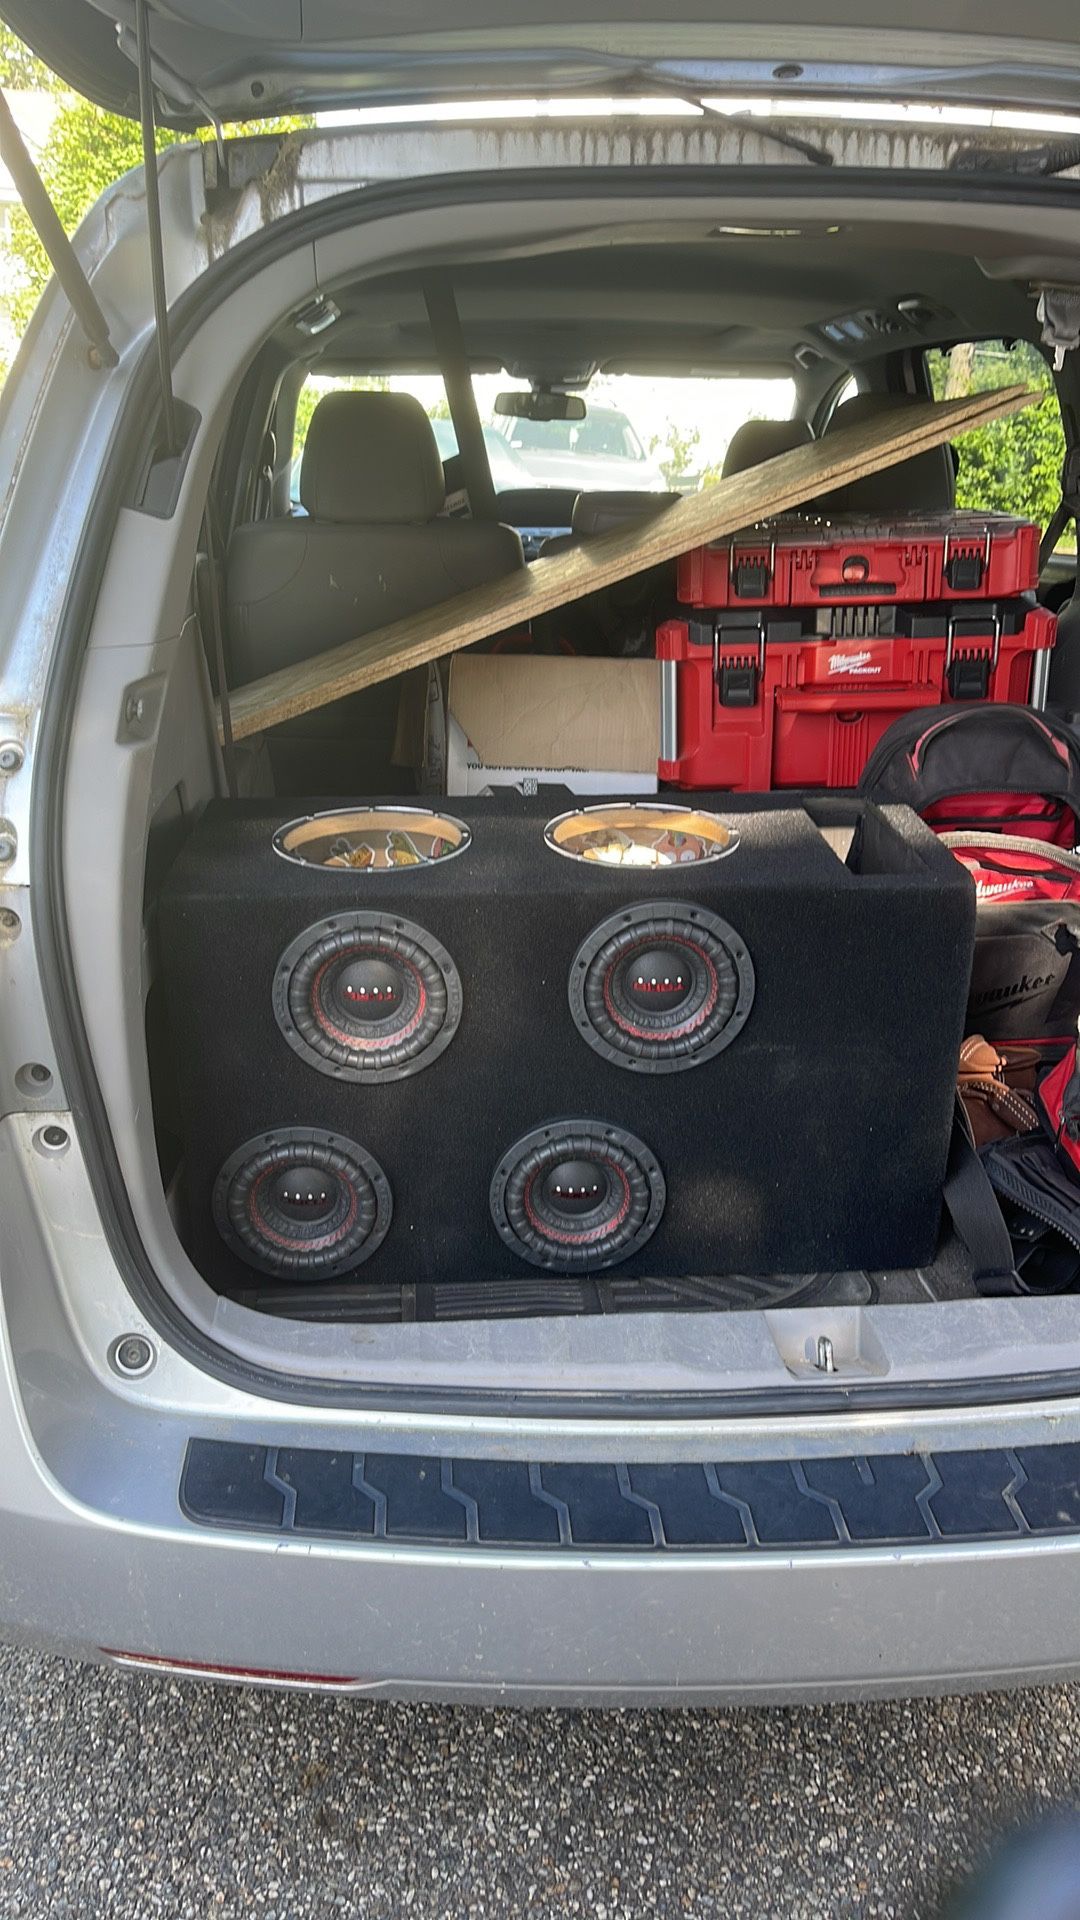 (4) 6.5 Toro Subwoofer With Box